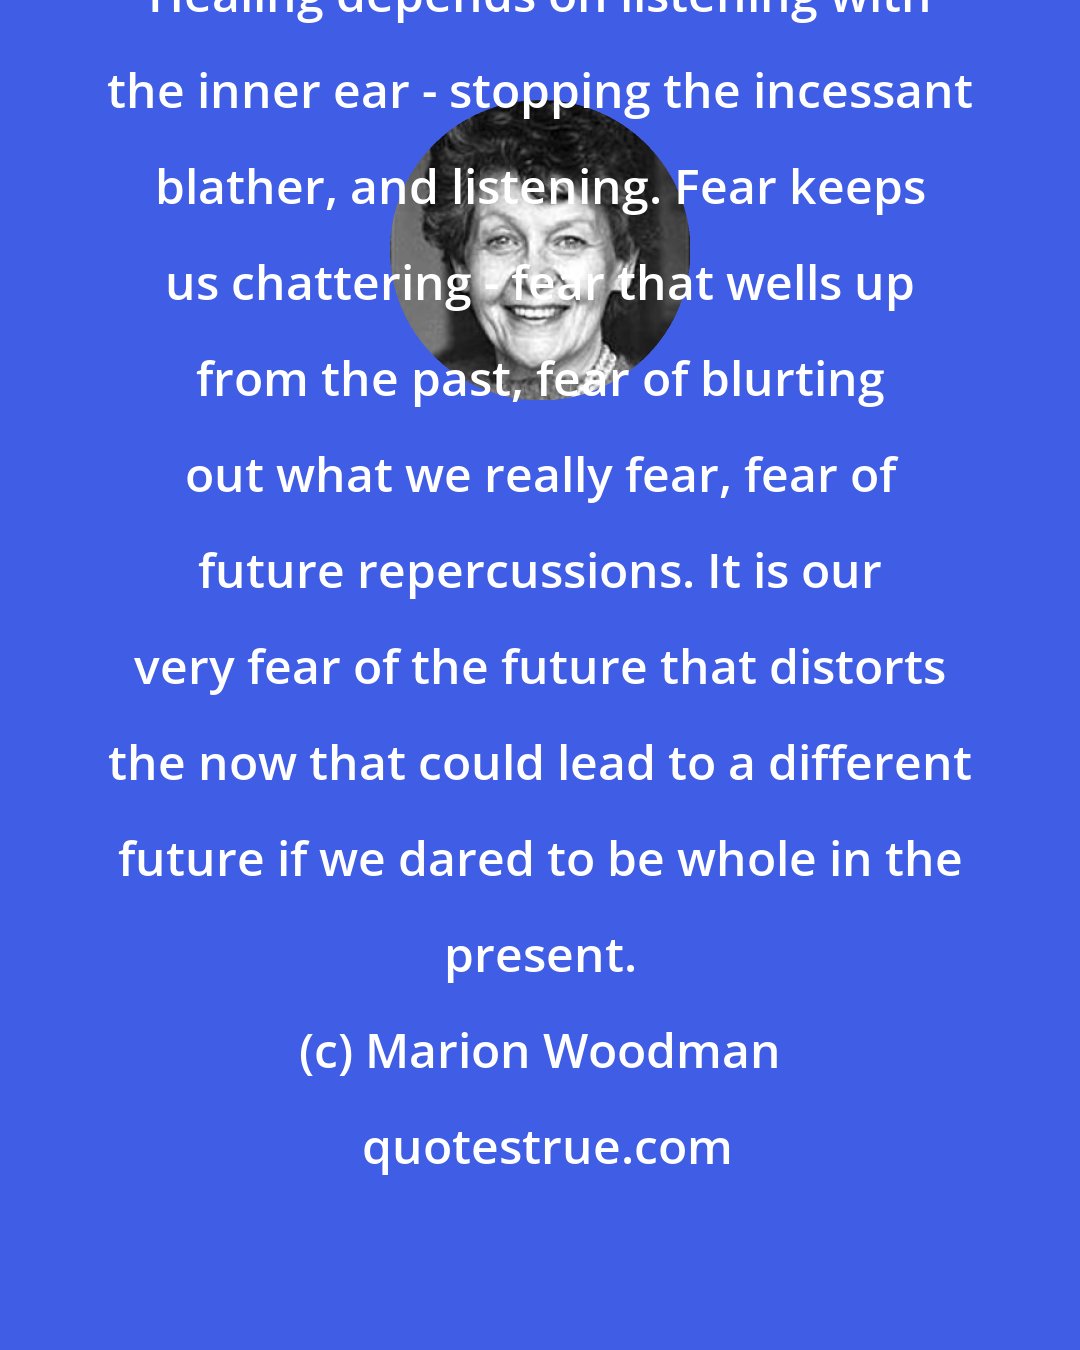 Marion Woodman: Healing depends on listening with the inner ear - stopping the incessant blather, and listening. Fear keeps us chattering - fear that wells up from the past, fear of blurting out what we really fear, fear of future repercussions. It is our very fear of the future that distorts the now that could lead to a different future if we dared to be whole in the present.